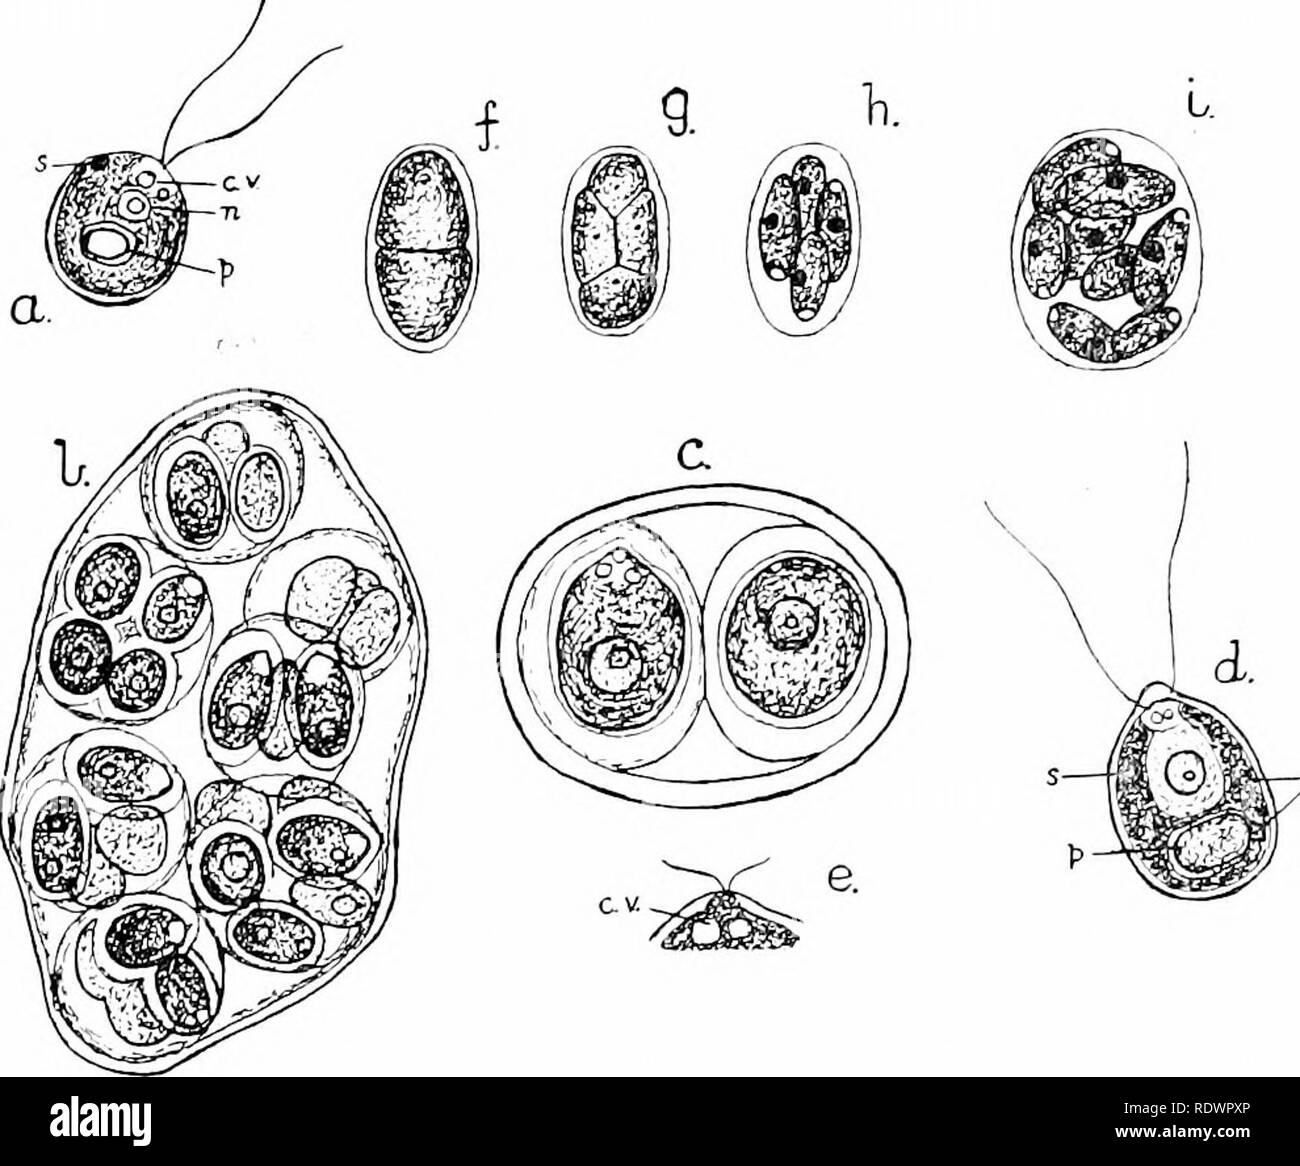 . An introduction to the structure and reproduction of plants. Plant anatomy; Plants. l82 STRUCTURE OF CHLAMYDOMONAS The movement of the Clilajnydomonas-individusds is accom- pHshed by means of two delicate thread-hke outgrowths, the cilia (Fig. 96, a and d), whicli can be detected arising close together at the front end, and are usually as long, or longer than, the body of the cell. They are recognisable under the high power in stationary individuals, but are more readily seen after adding a drop of iodine, which has the effect of killing. Fig. 96.—Individuals and vegetative reproduction of C Stock Photo